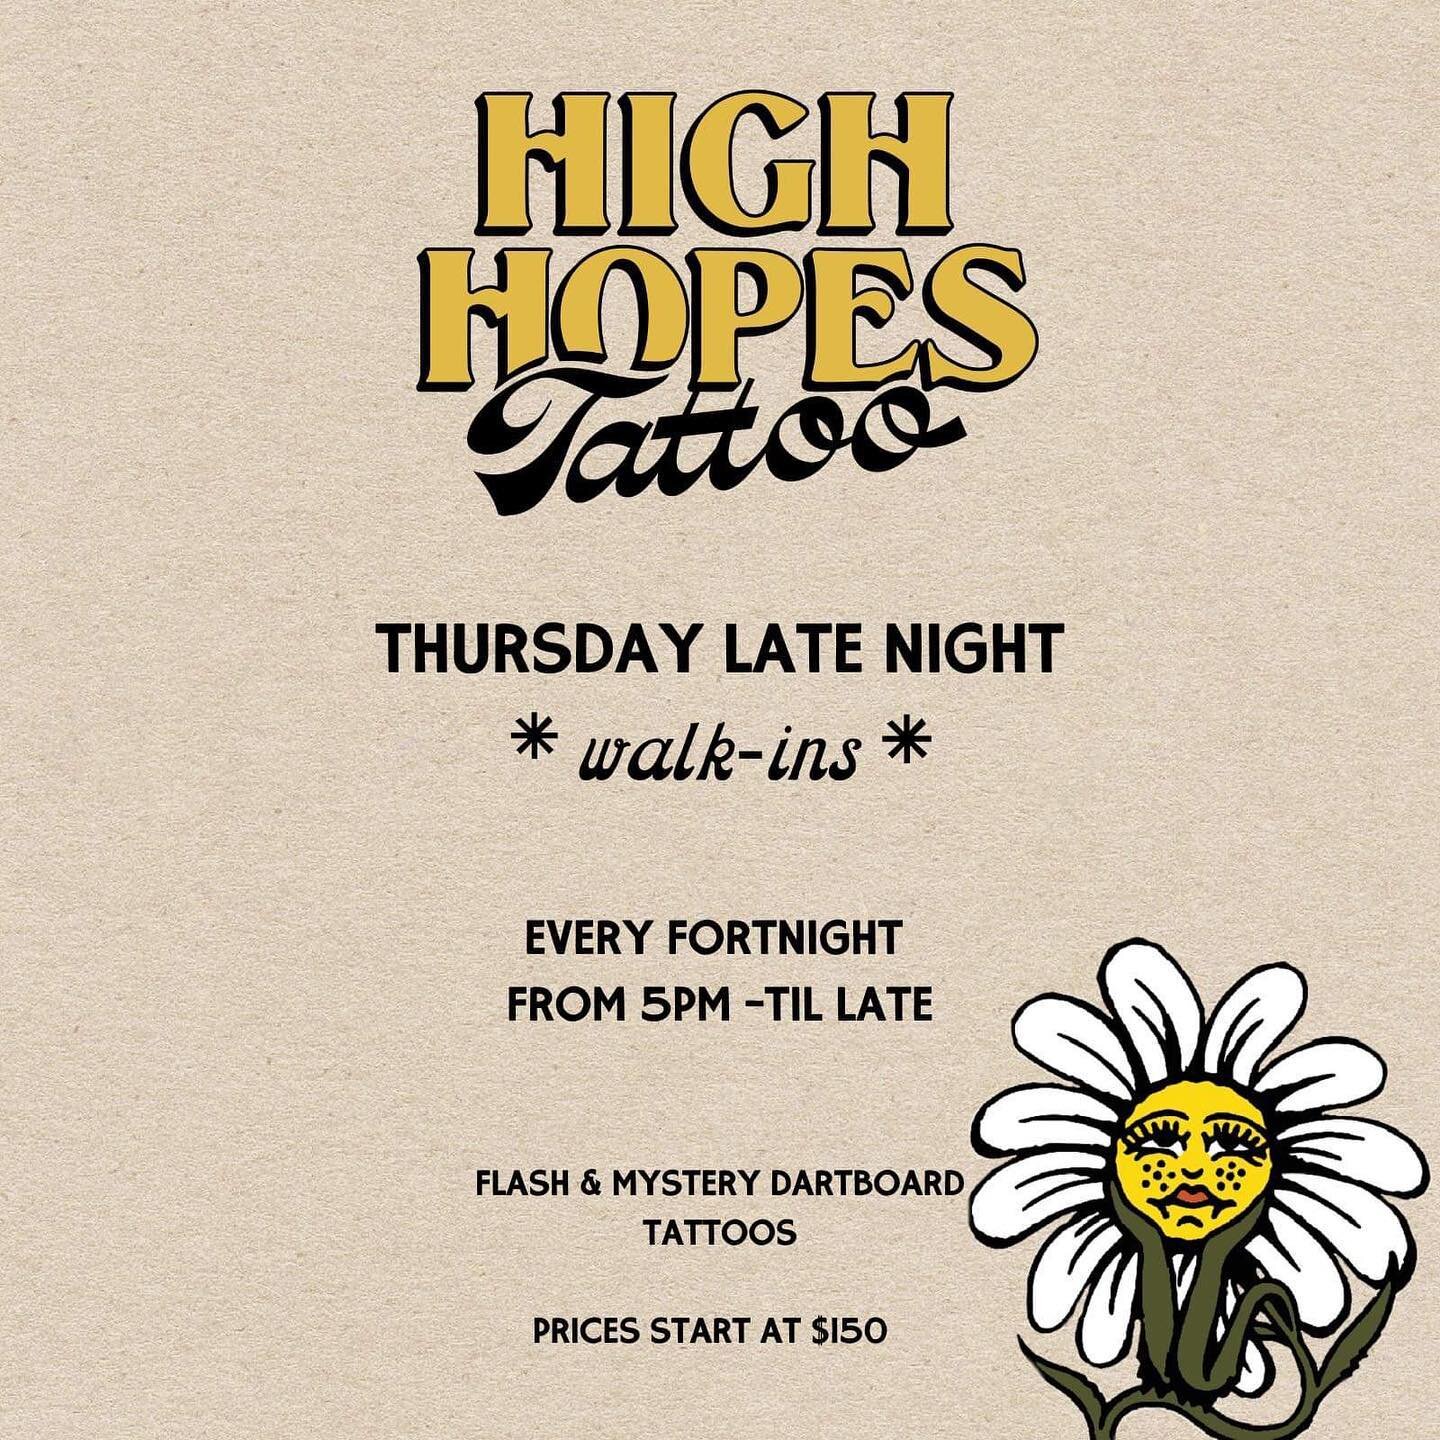 As of this coming Thursday the 18th, we will be hanging back for some late night tattoos! We will be offering late night walk-ins from 5pm every second Thursday. All flash is available &amp; don&rsquo;t forget our mystery dartboard too! Any questions